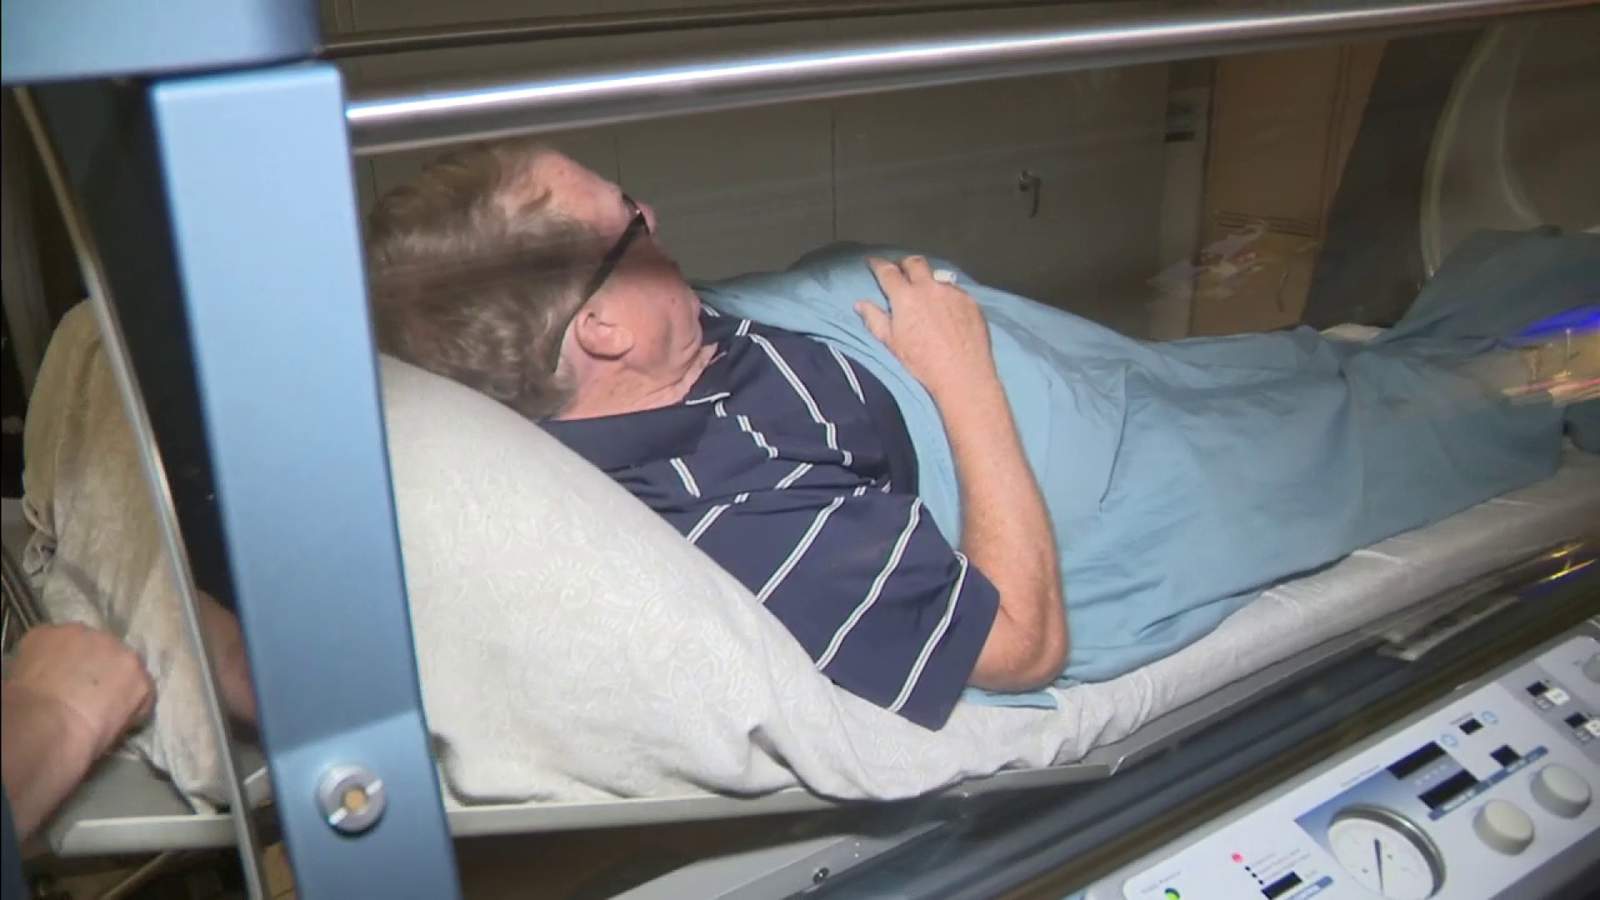 Study underway into hyperbaric treatment for Gulf War syndrome